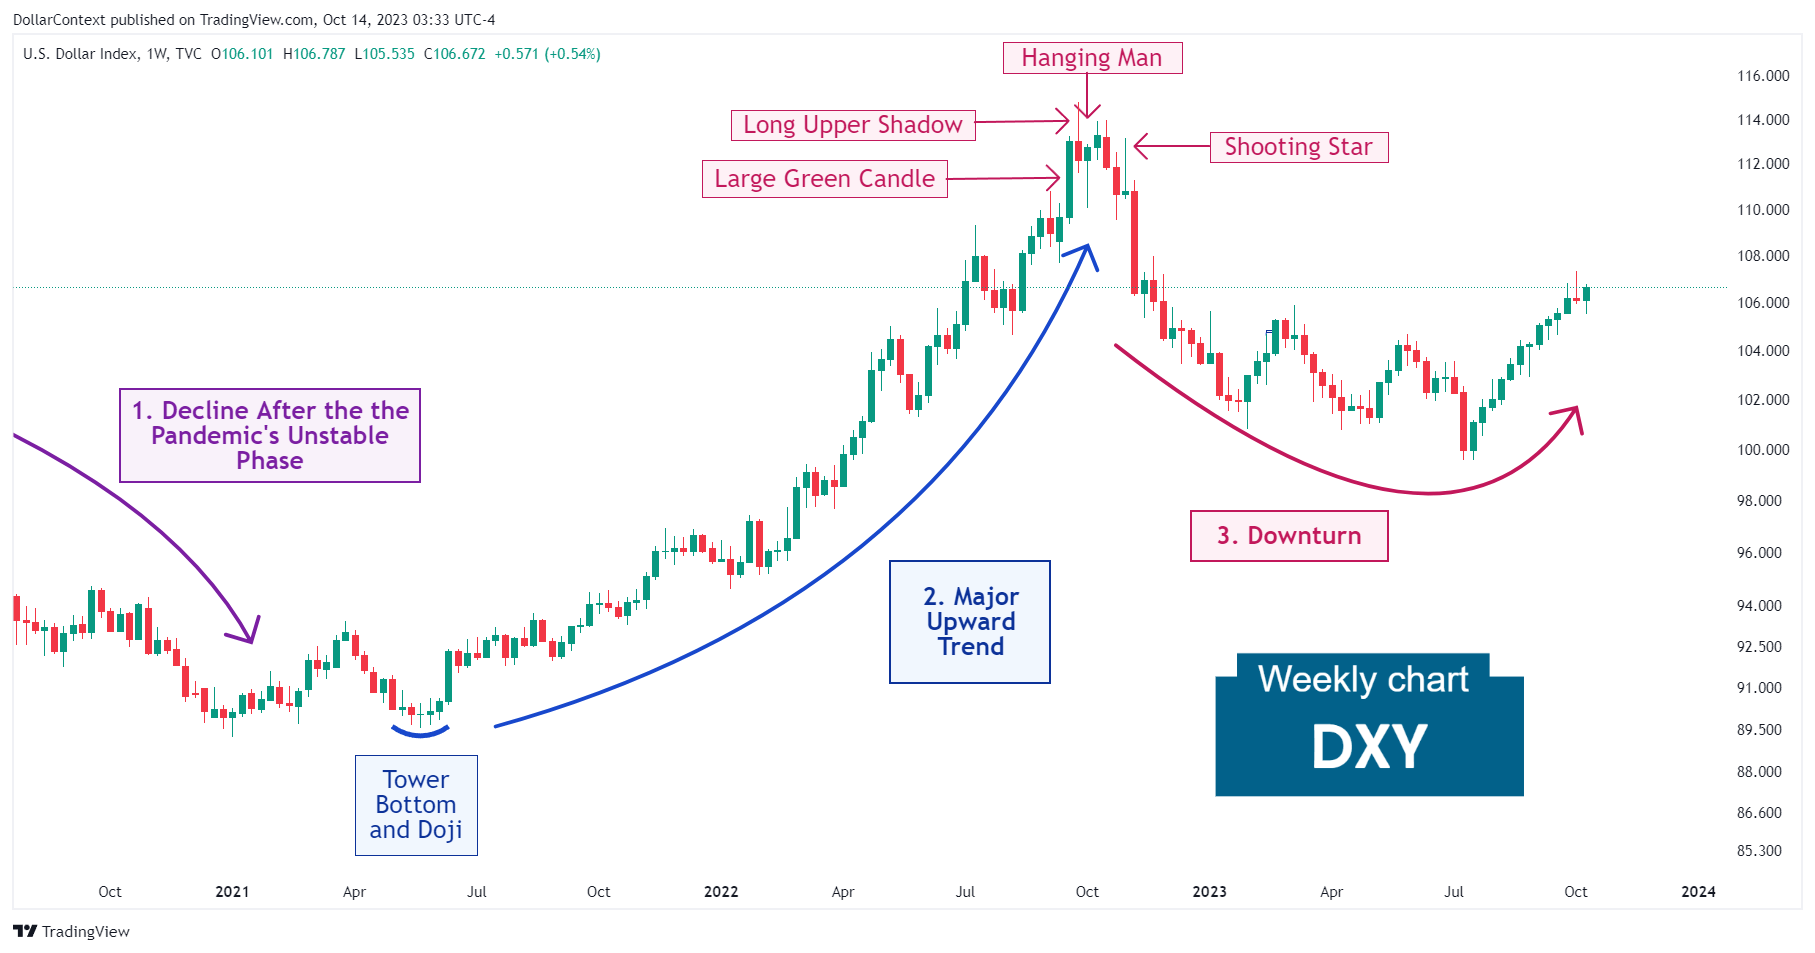 U.S. Dollar Index (DXY): The Downturn in Late 2022 and First Half of 2023 (Weekly Chart)